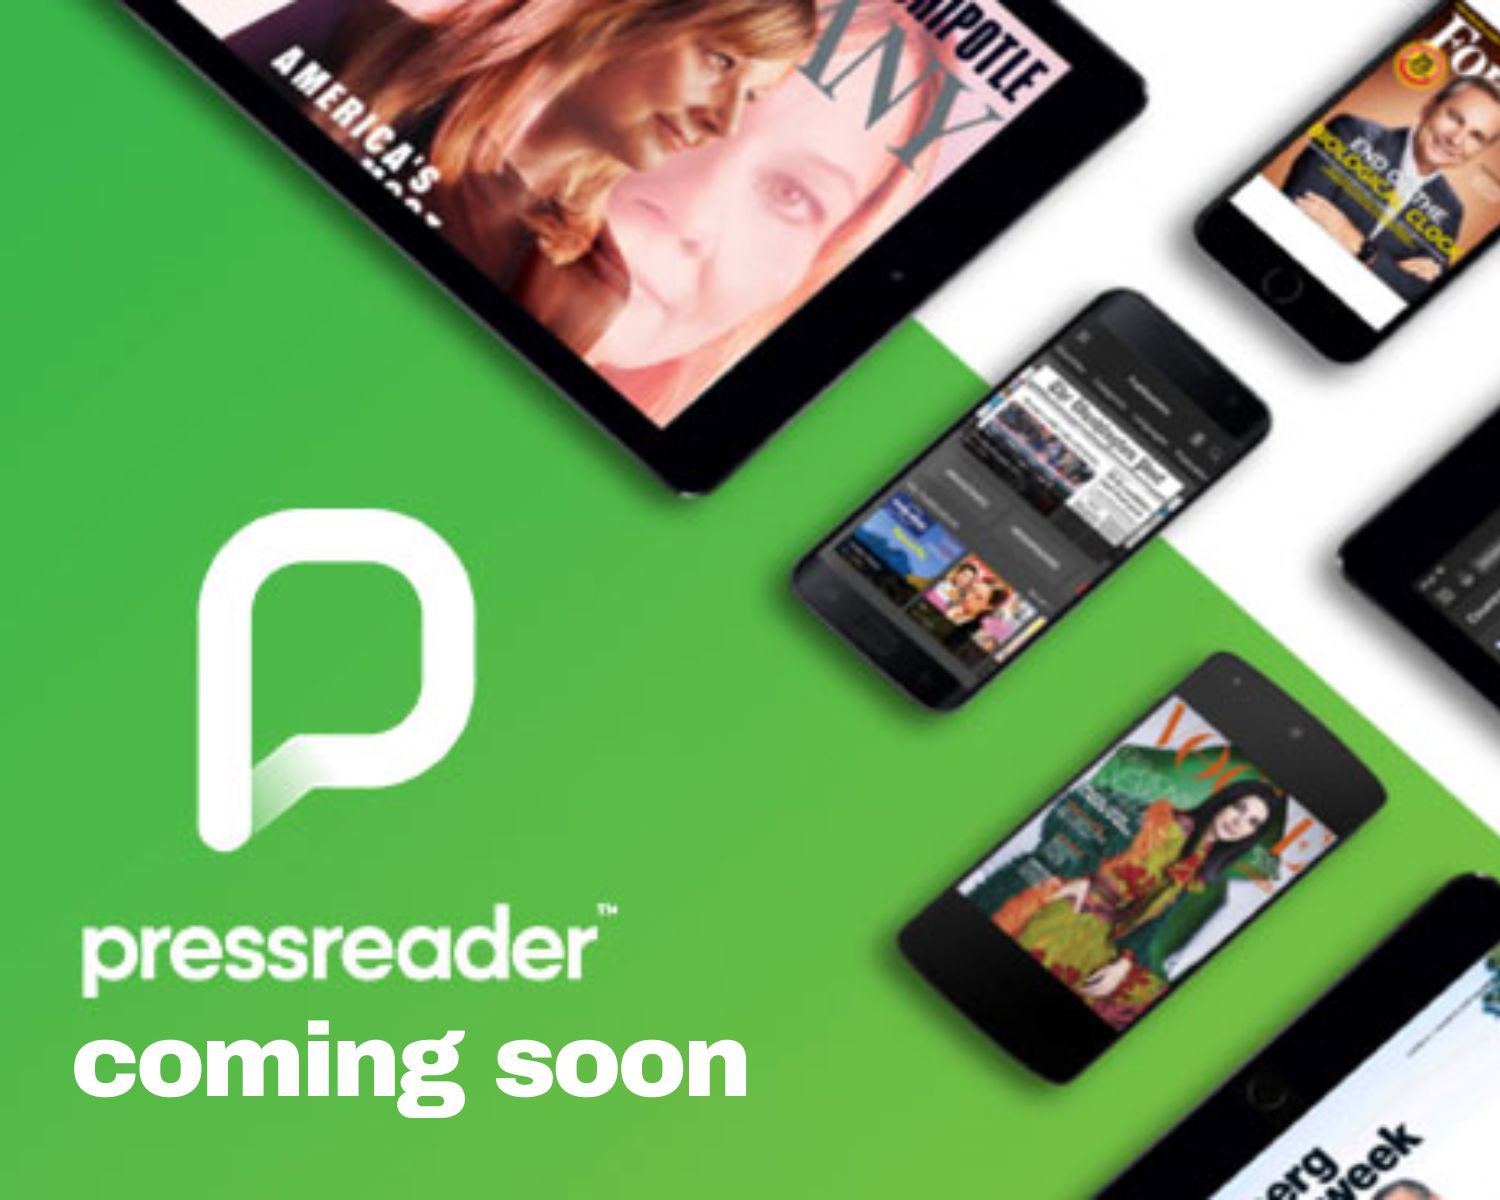 Press Reader Coming Soon - Graphic with devices with magazines open